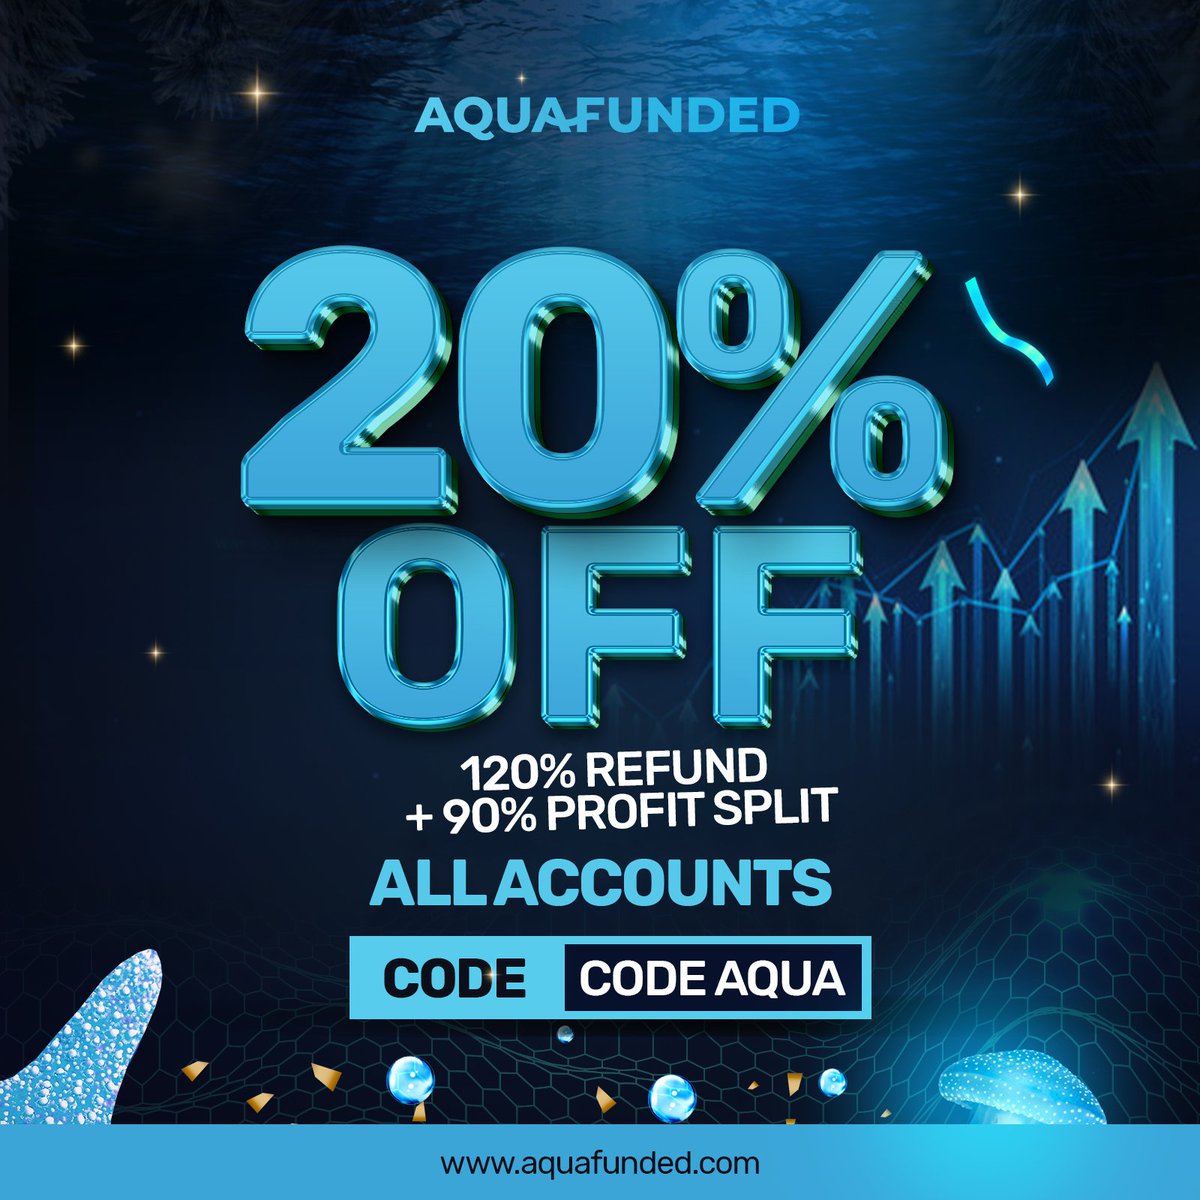 20% OFF All Accounts Promo 🎉 💙 120% Refund 💙 Bi-Weekly Payout 💙 90% Profit Split Make Waves with Trading 🌊 Get your Accounts Today aquafunded.com/?el=x